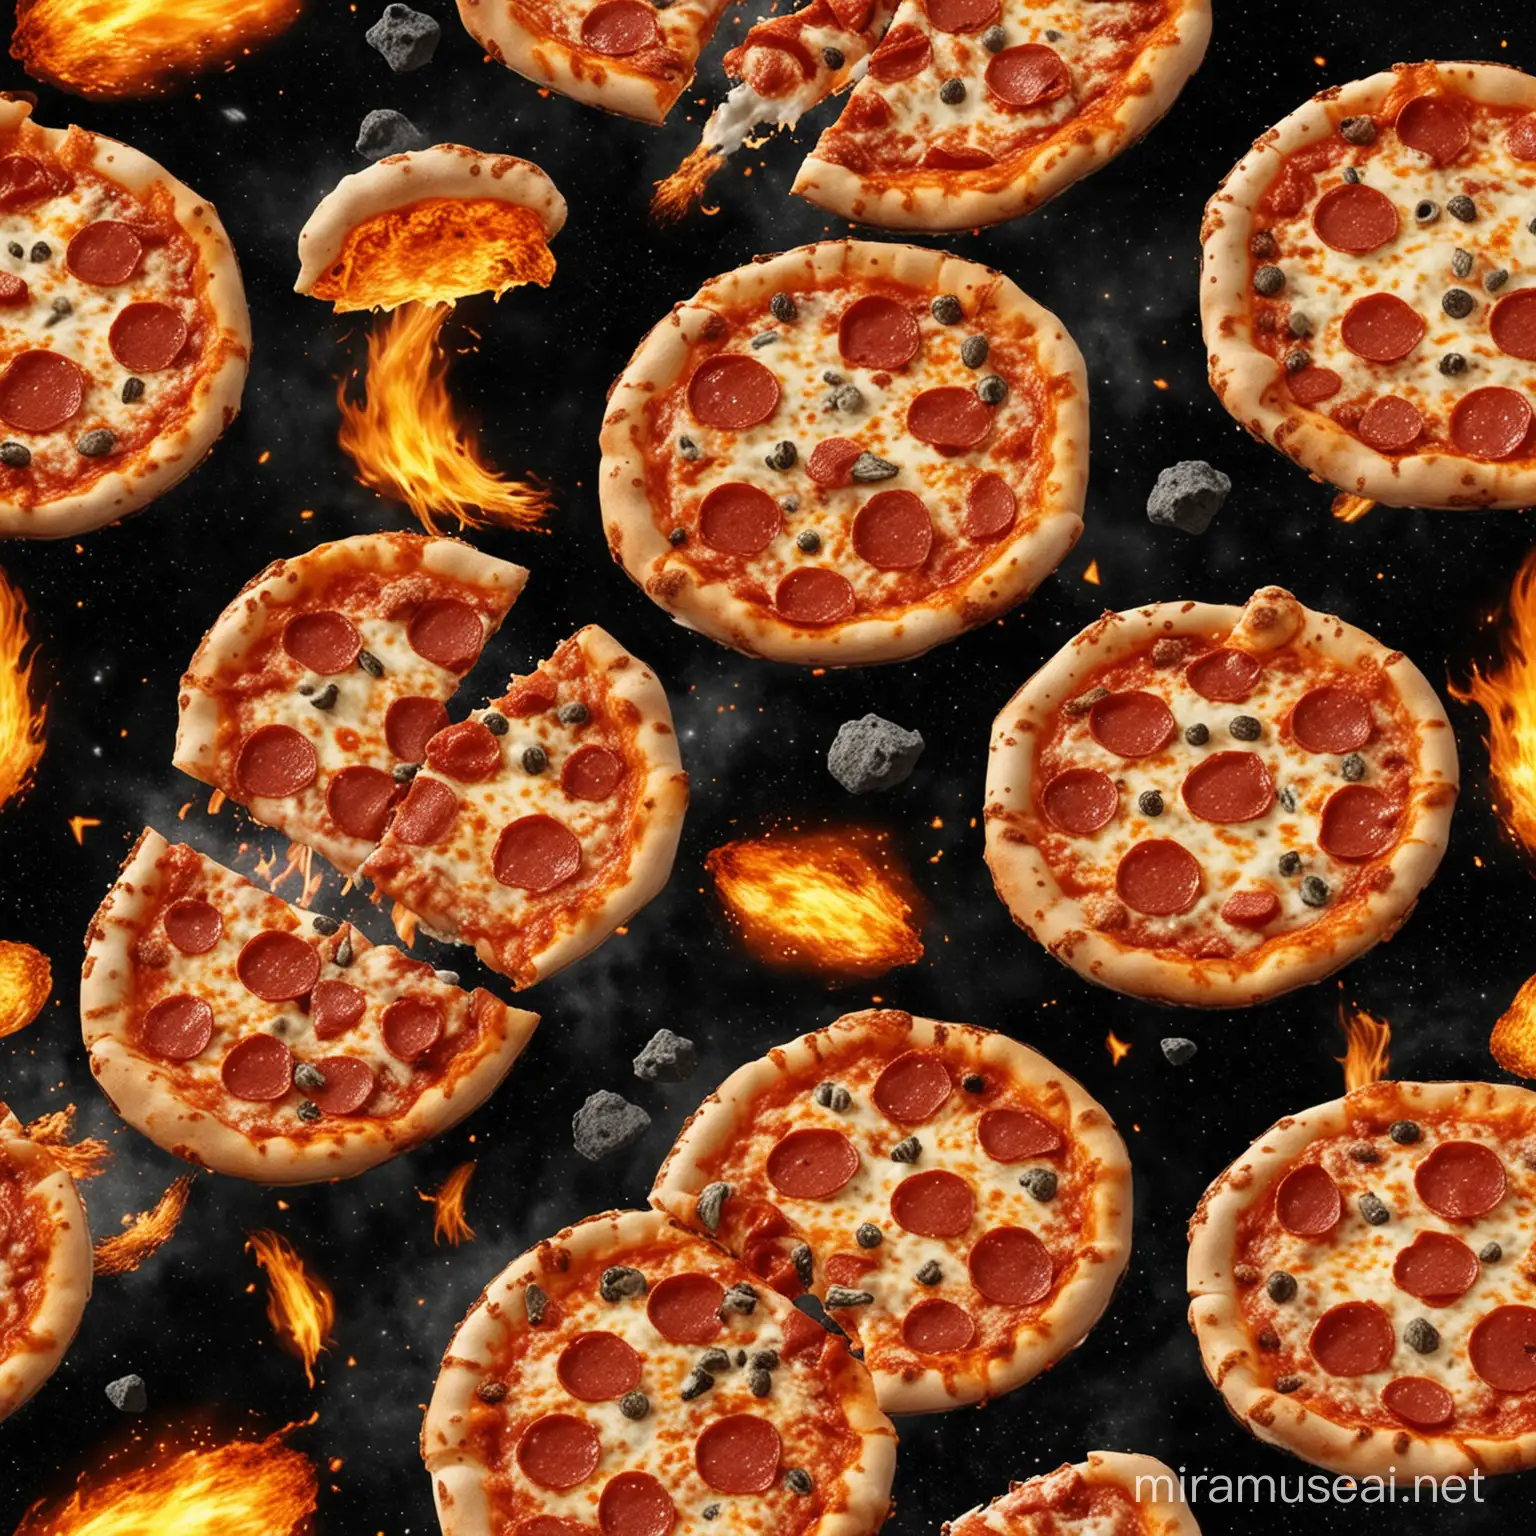 Flaming pizza asteroid's